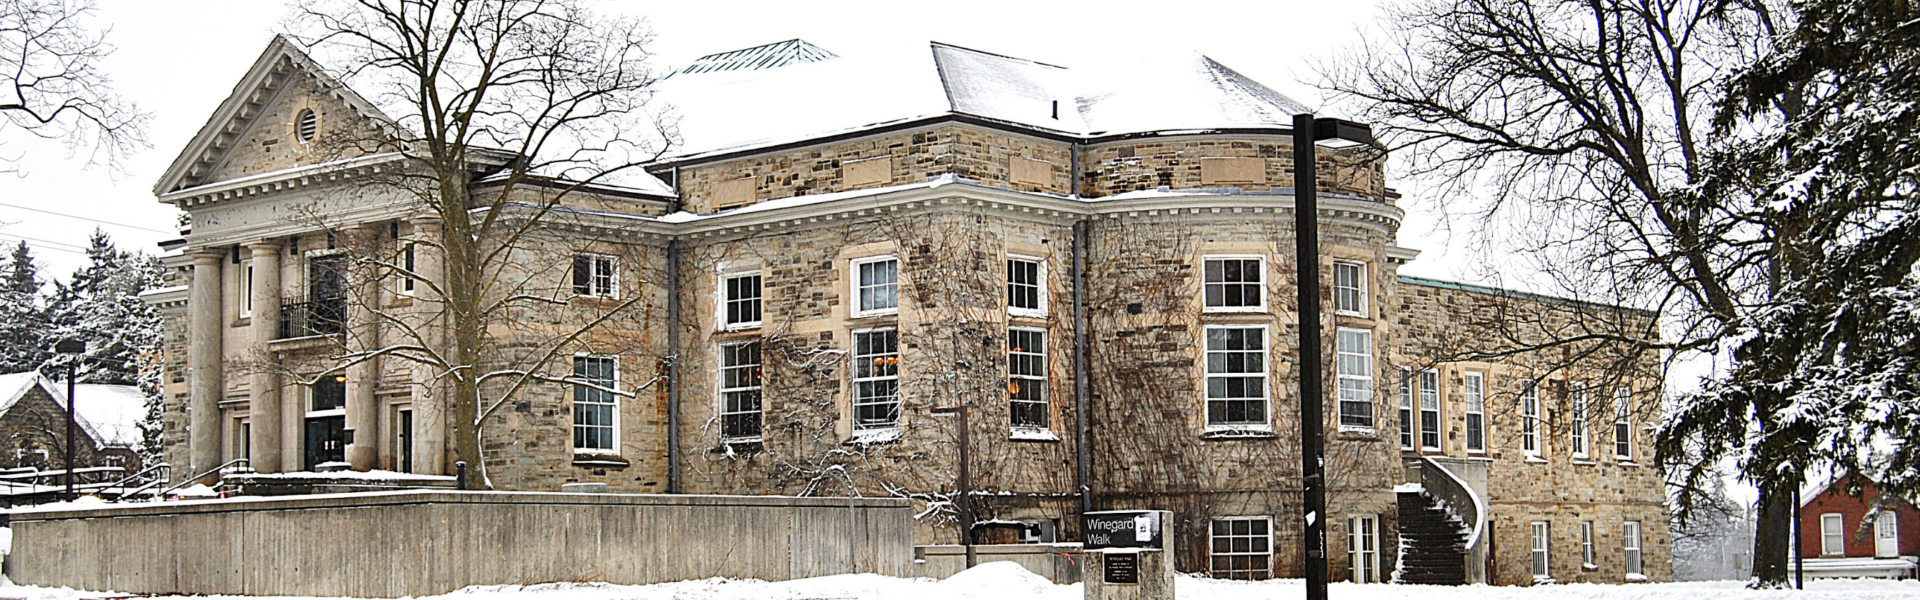 The stone Creelman Hall building in winter with snow